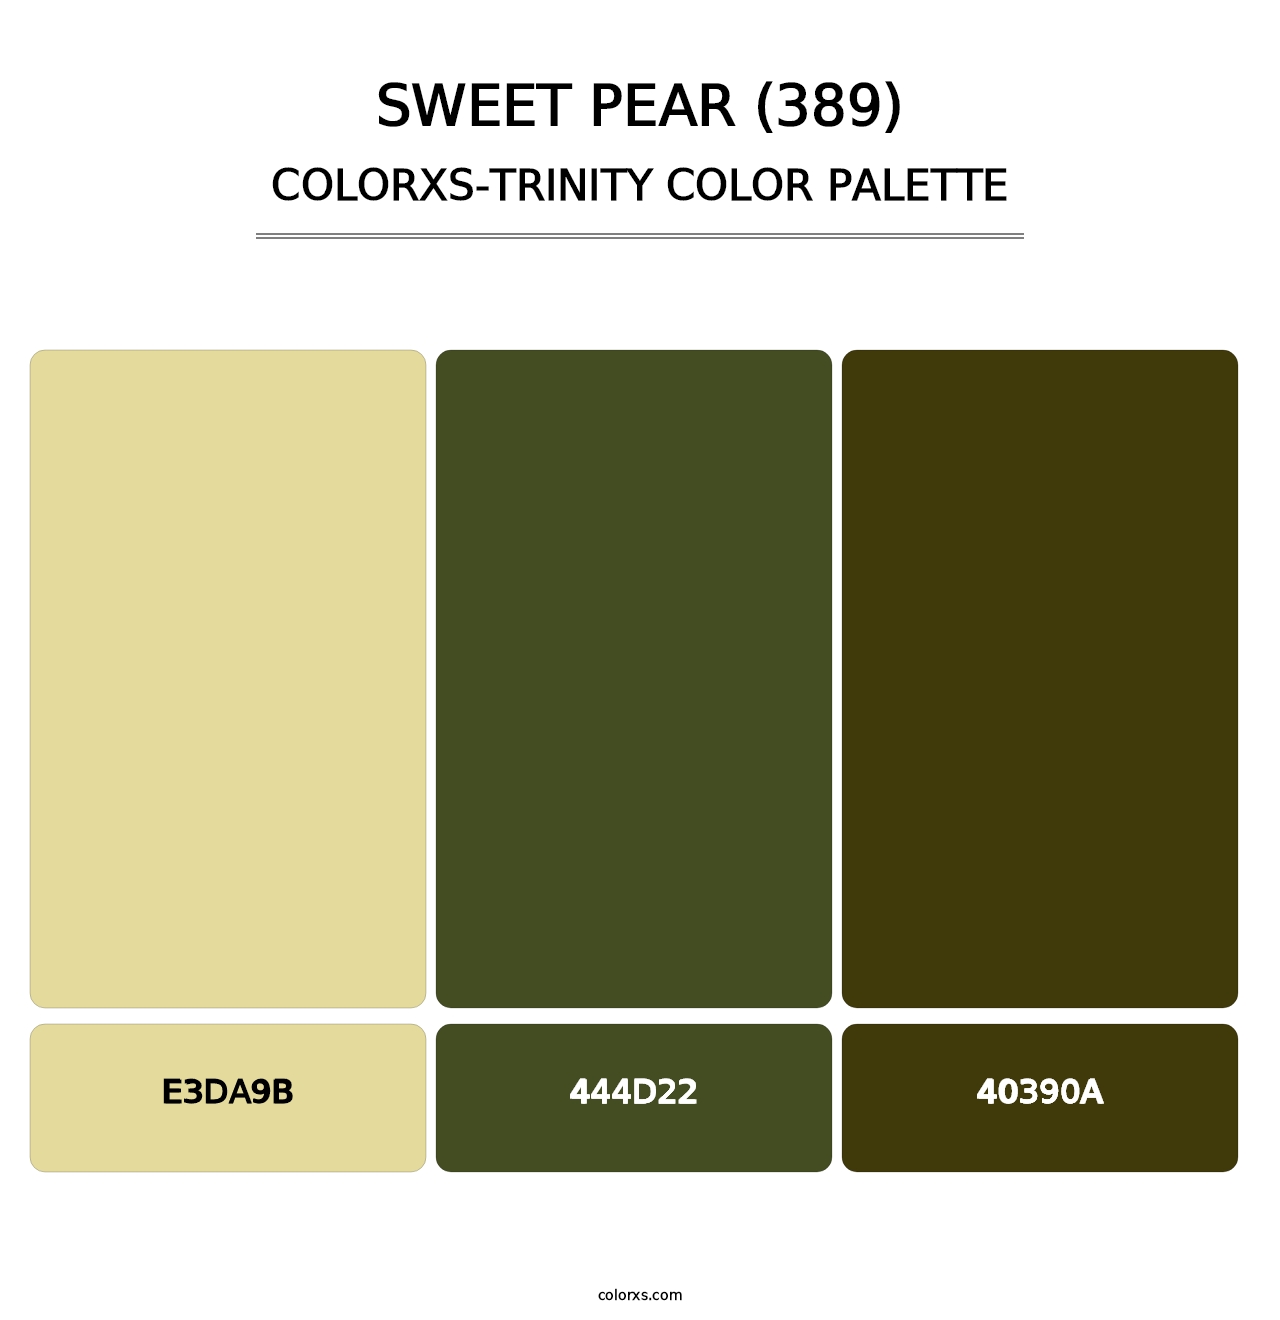 Sweet Pear (389) - Colorxs Trinity Palette